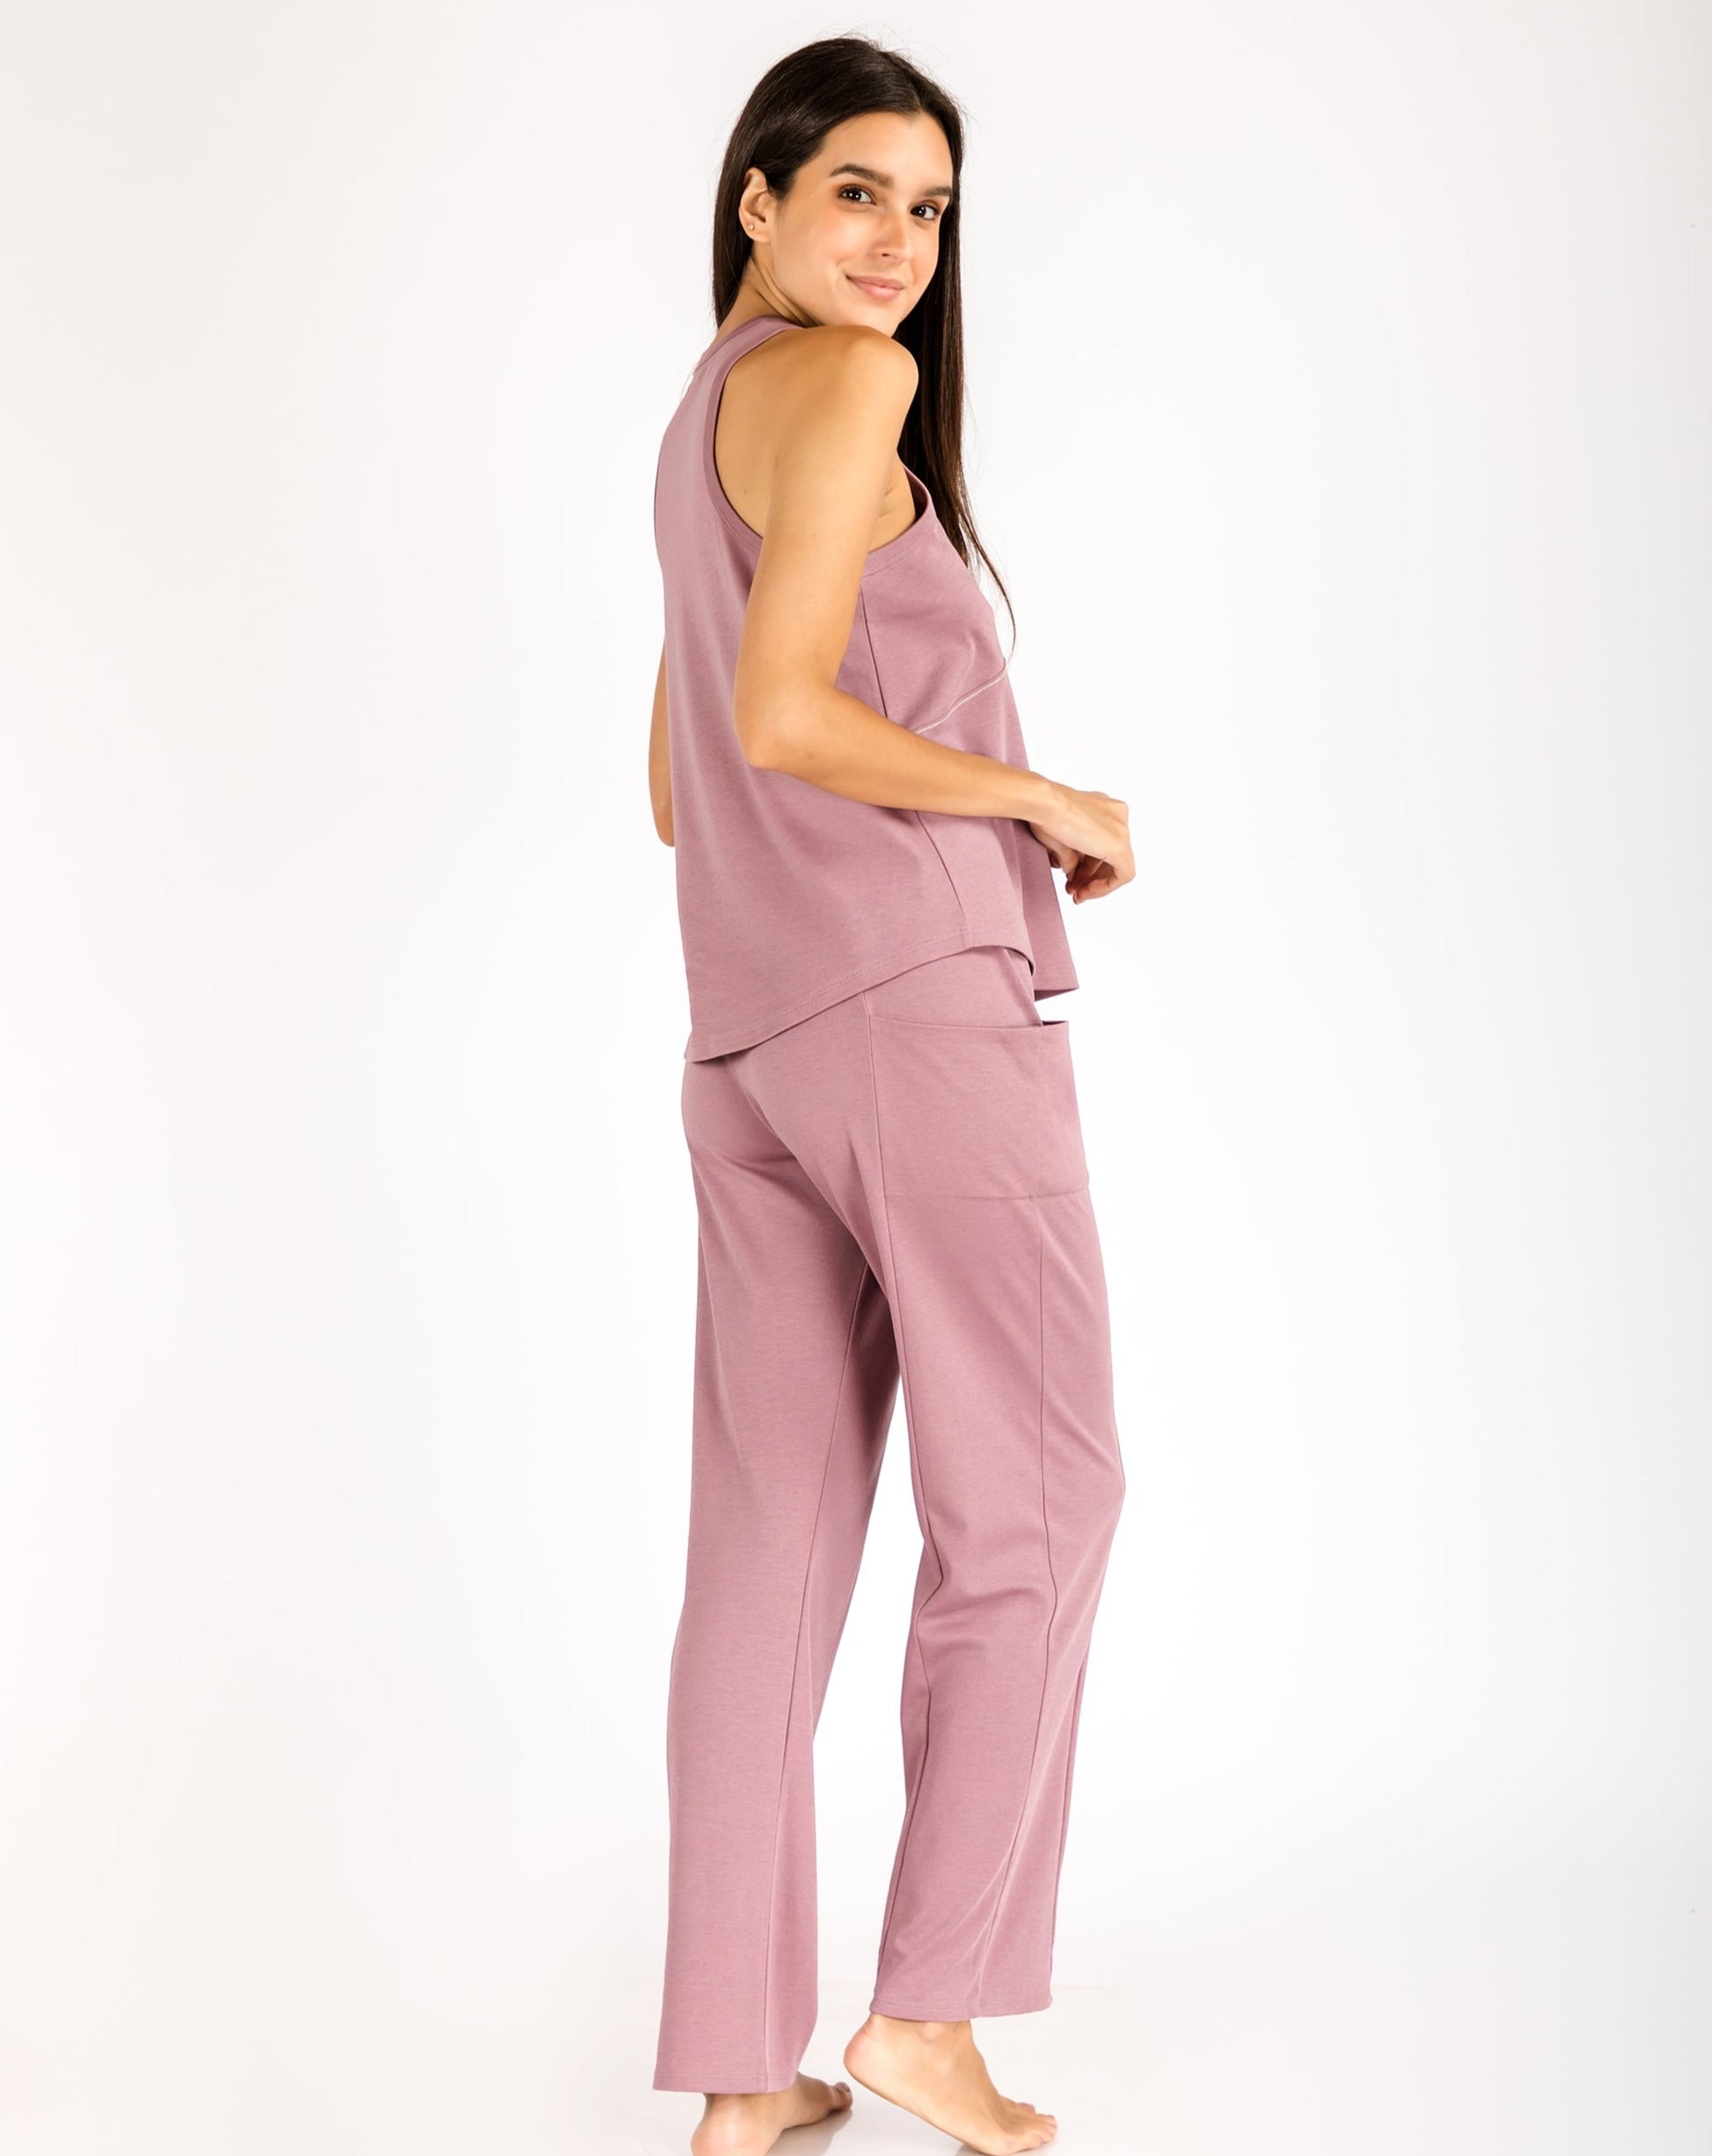 women_s-pajama-set-Straight-pant-with-pocket-detail-and-racer-neck-top-orchid-Lavender-Dreams-2